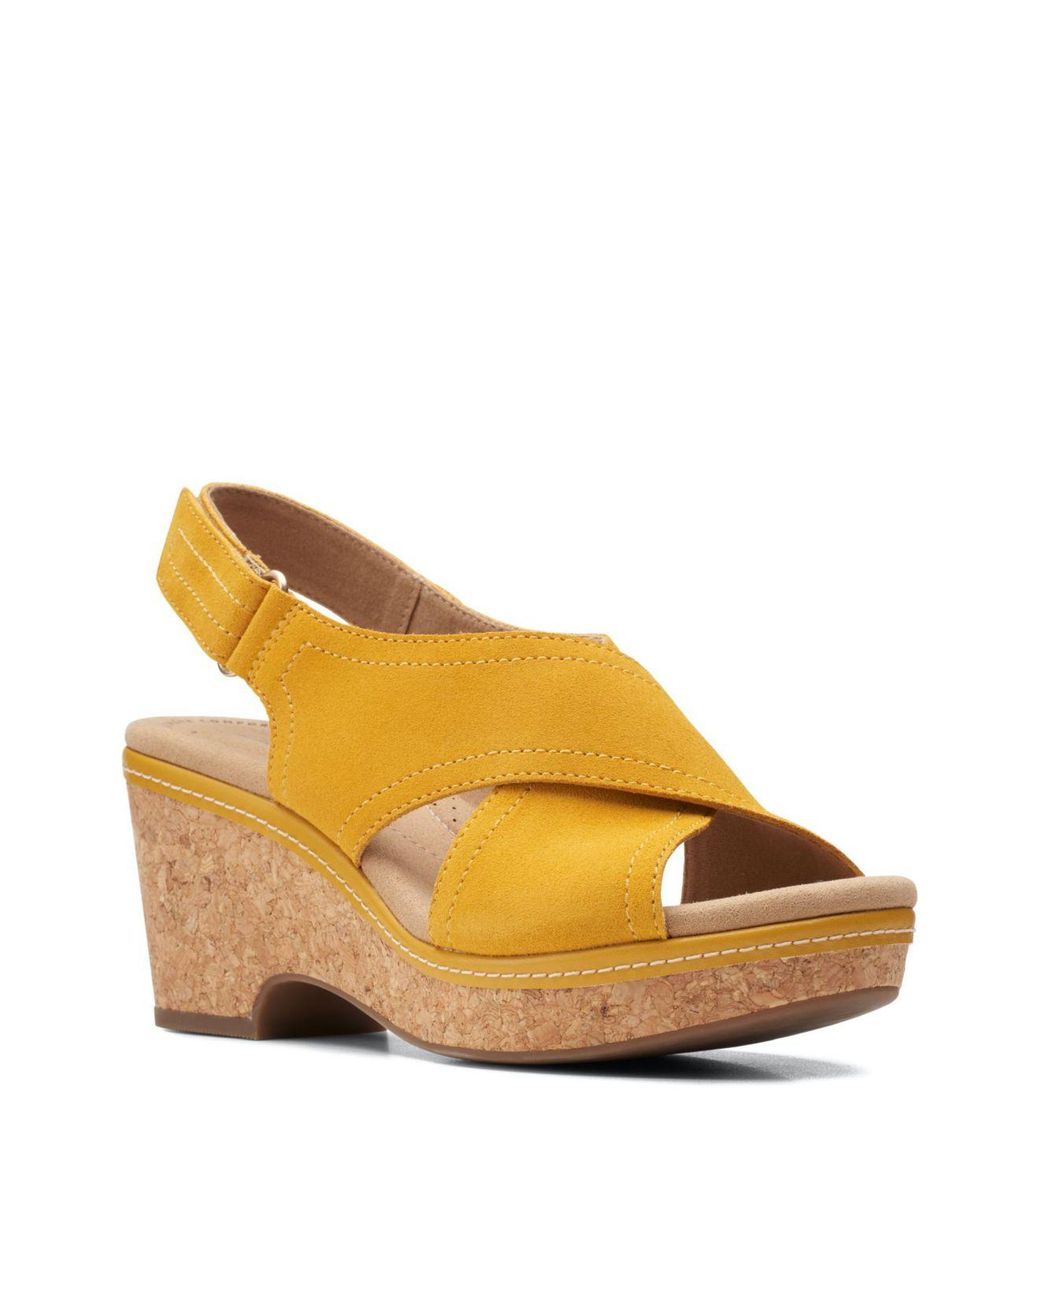 Clarks Suede Collection Giselle Cove Sandals in Golden Yellow Suede ...